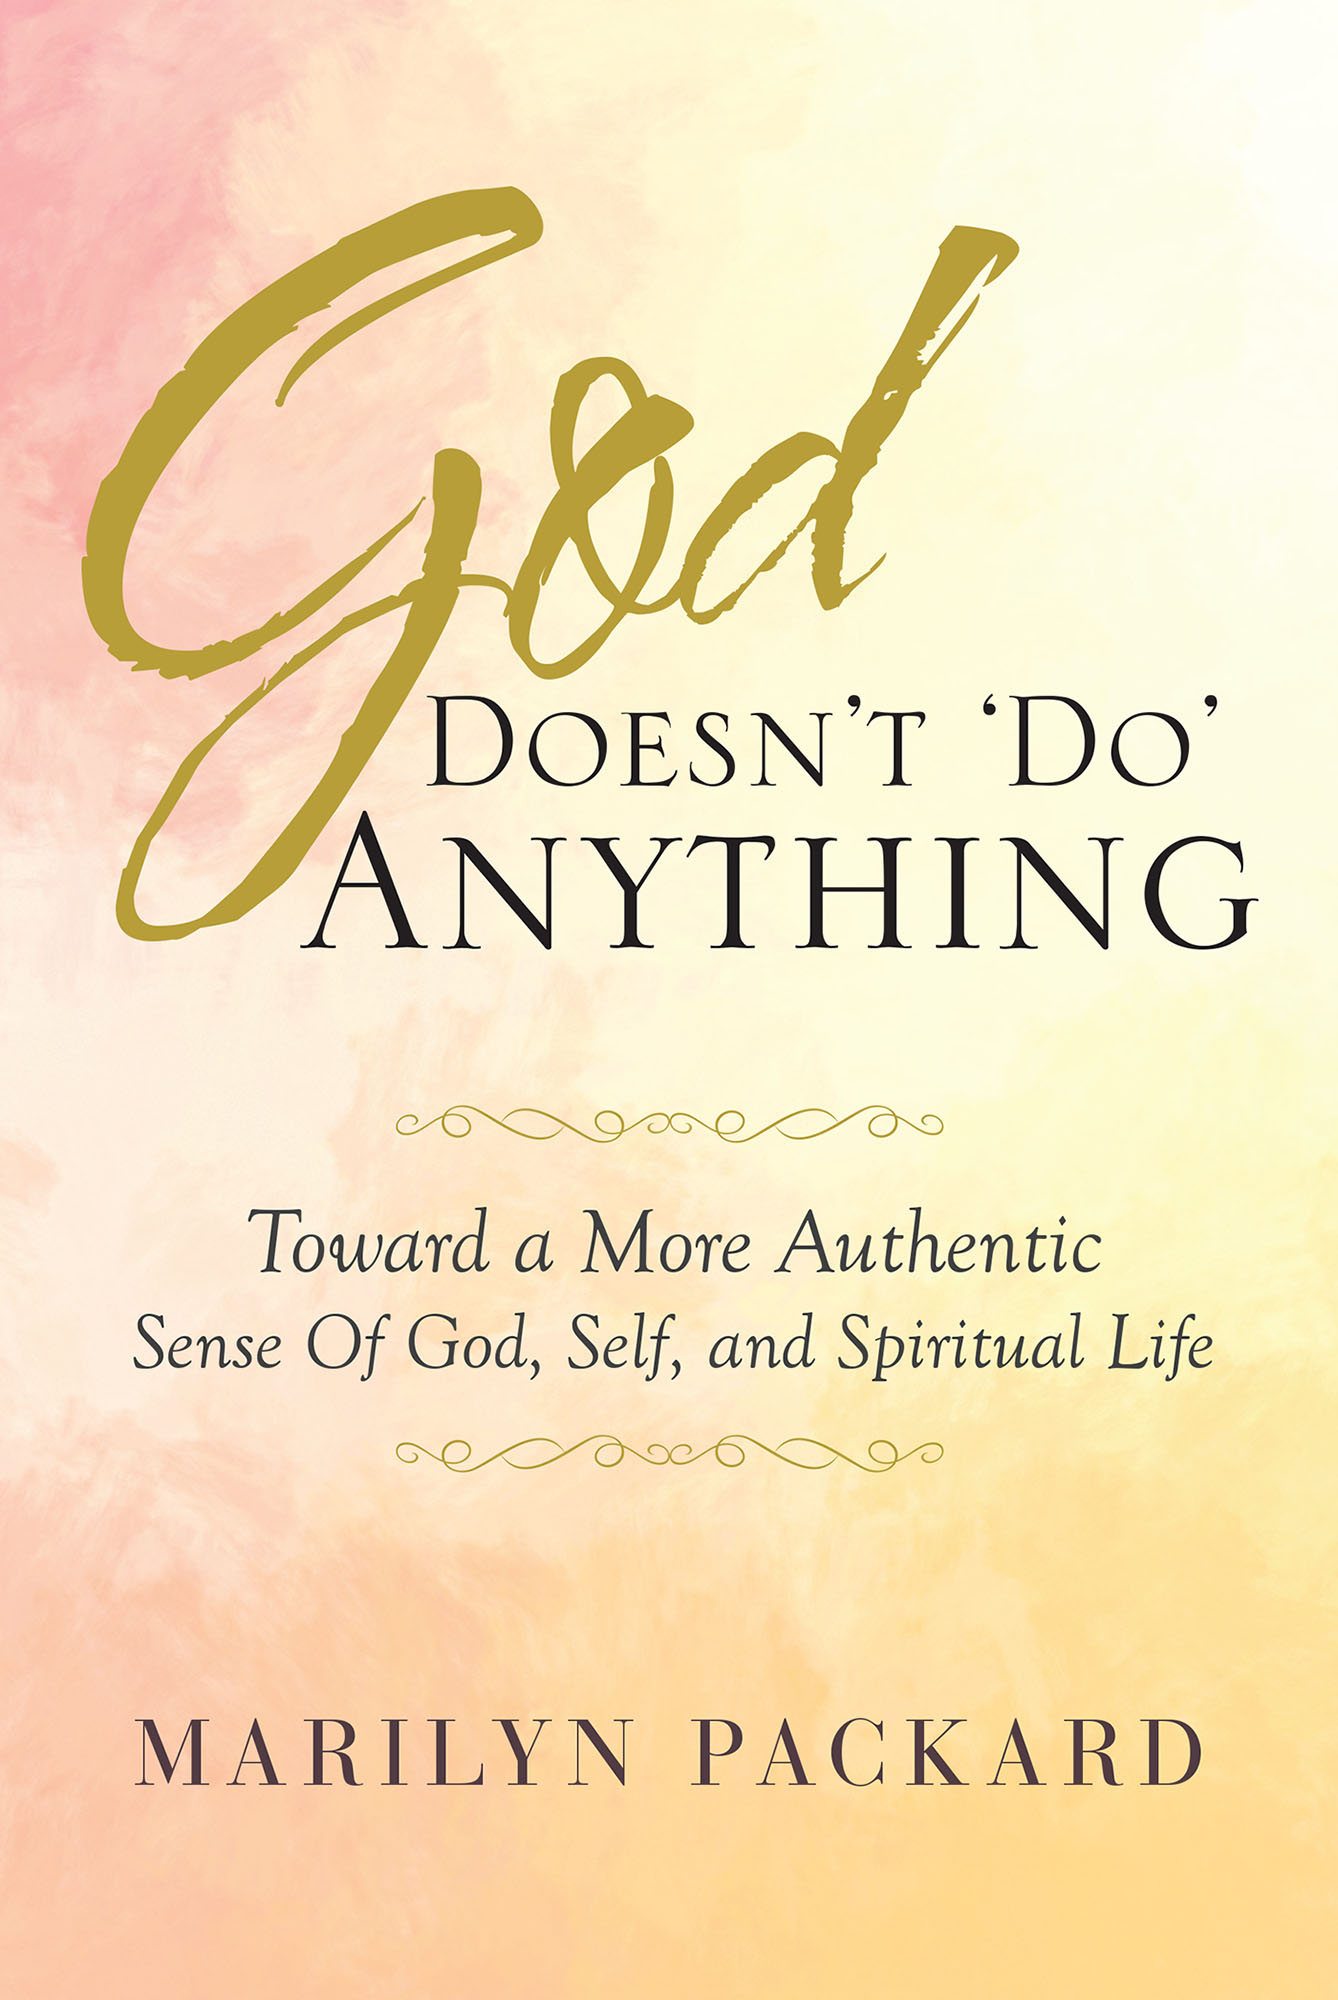 God Doesn't 'Do' Anything Cover Image